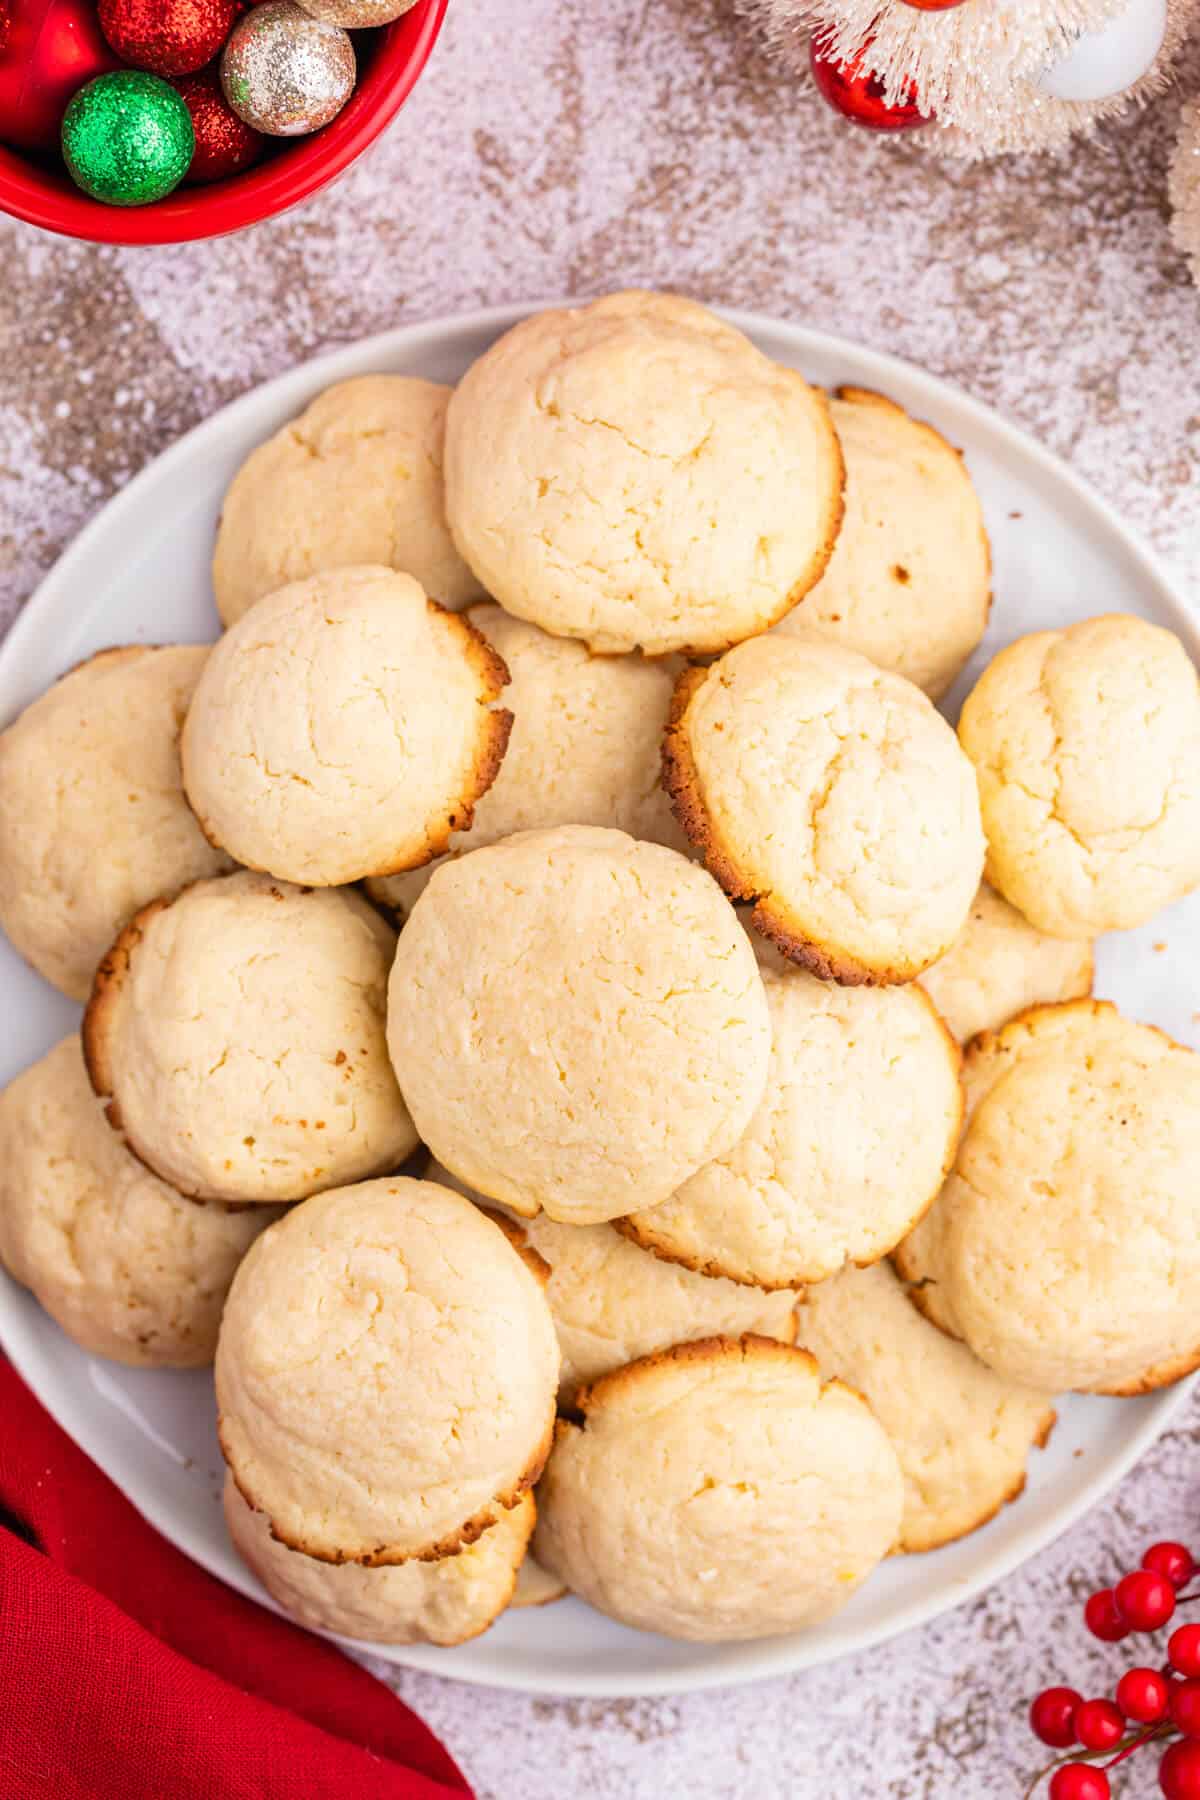 Cream cheese cookies on a plate.